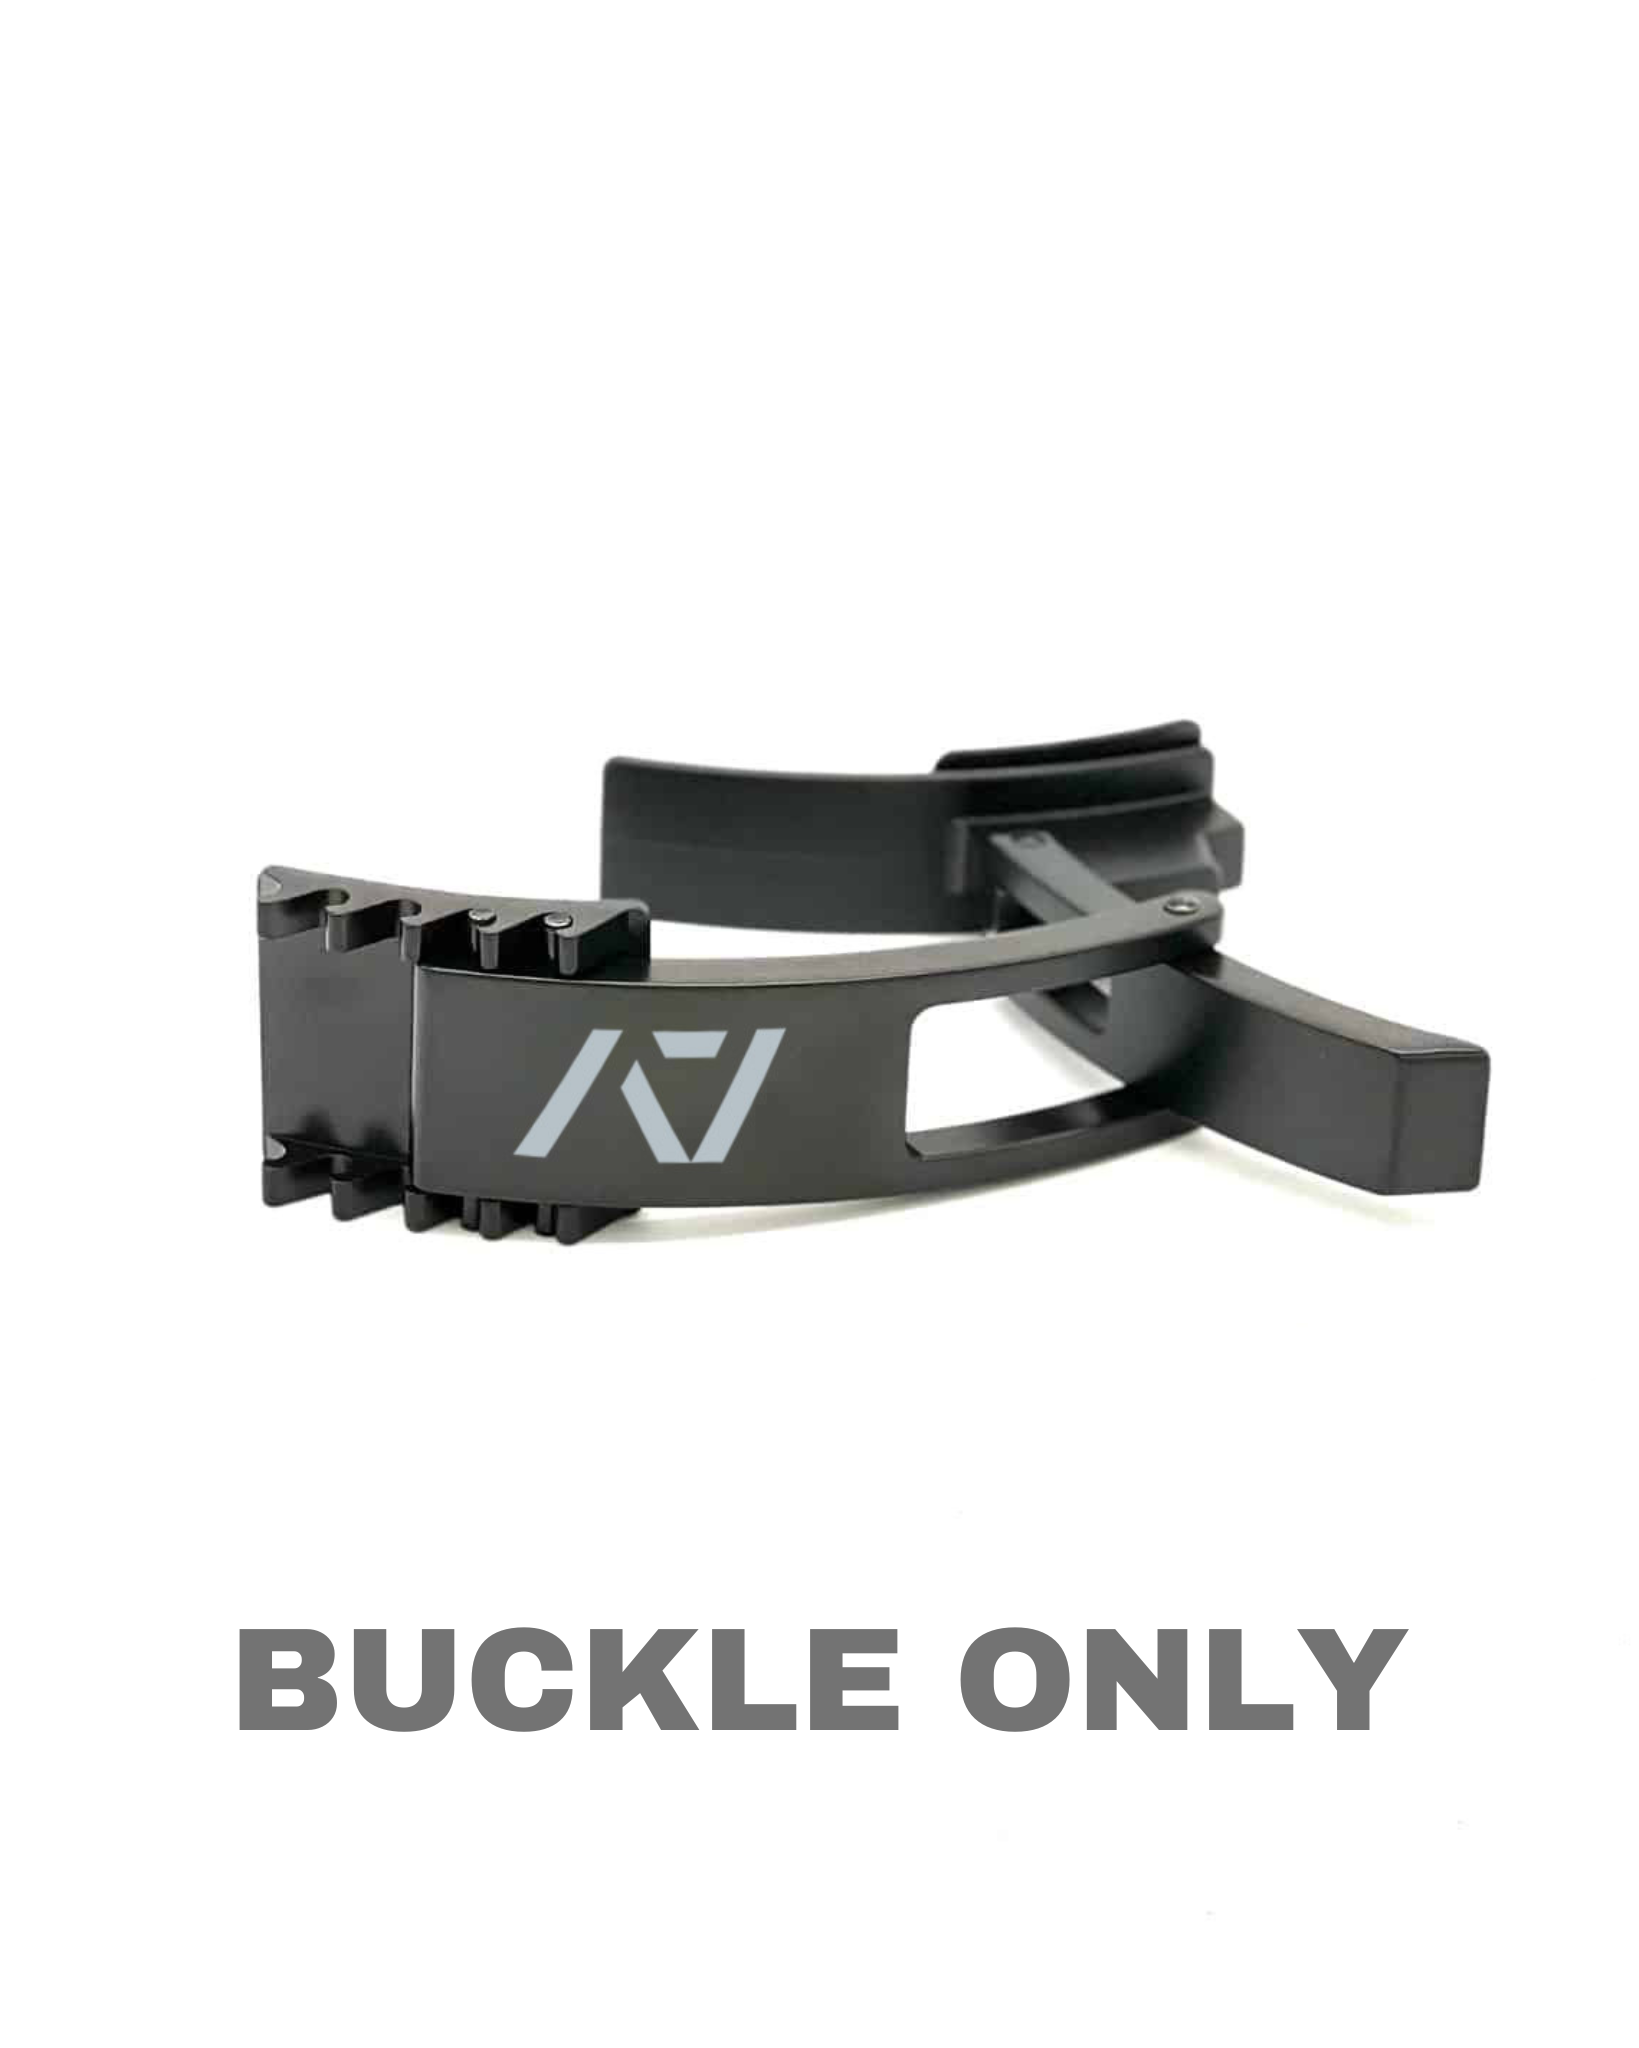 A7 IPF Approved Lever Belt features a black design with black leather, black engraved buckle and debossed A7 logo on the leather. The new Pioneer Adjustable Lever, PAL, buckle allows you to quickly adjust the tightness of your belt for a perfect fit. The IPF Approved Kit includes Singlet, A7 Meet Shirt, A7 Zebra Wrist Wraps, A7 Deadlift Socks, Hourglass Knee Sleeves (Stiff Knee Sleeves and Rigor Mortis Knee Sleeves). Genouillères powerlifting shipping to France, Spain, Ireland, Germany, Italy and EU.